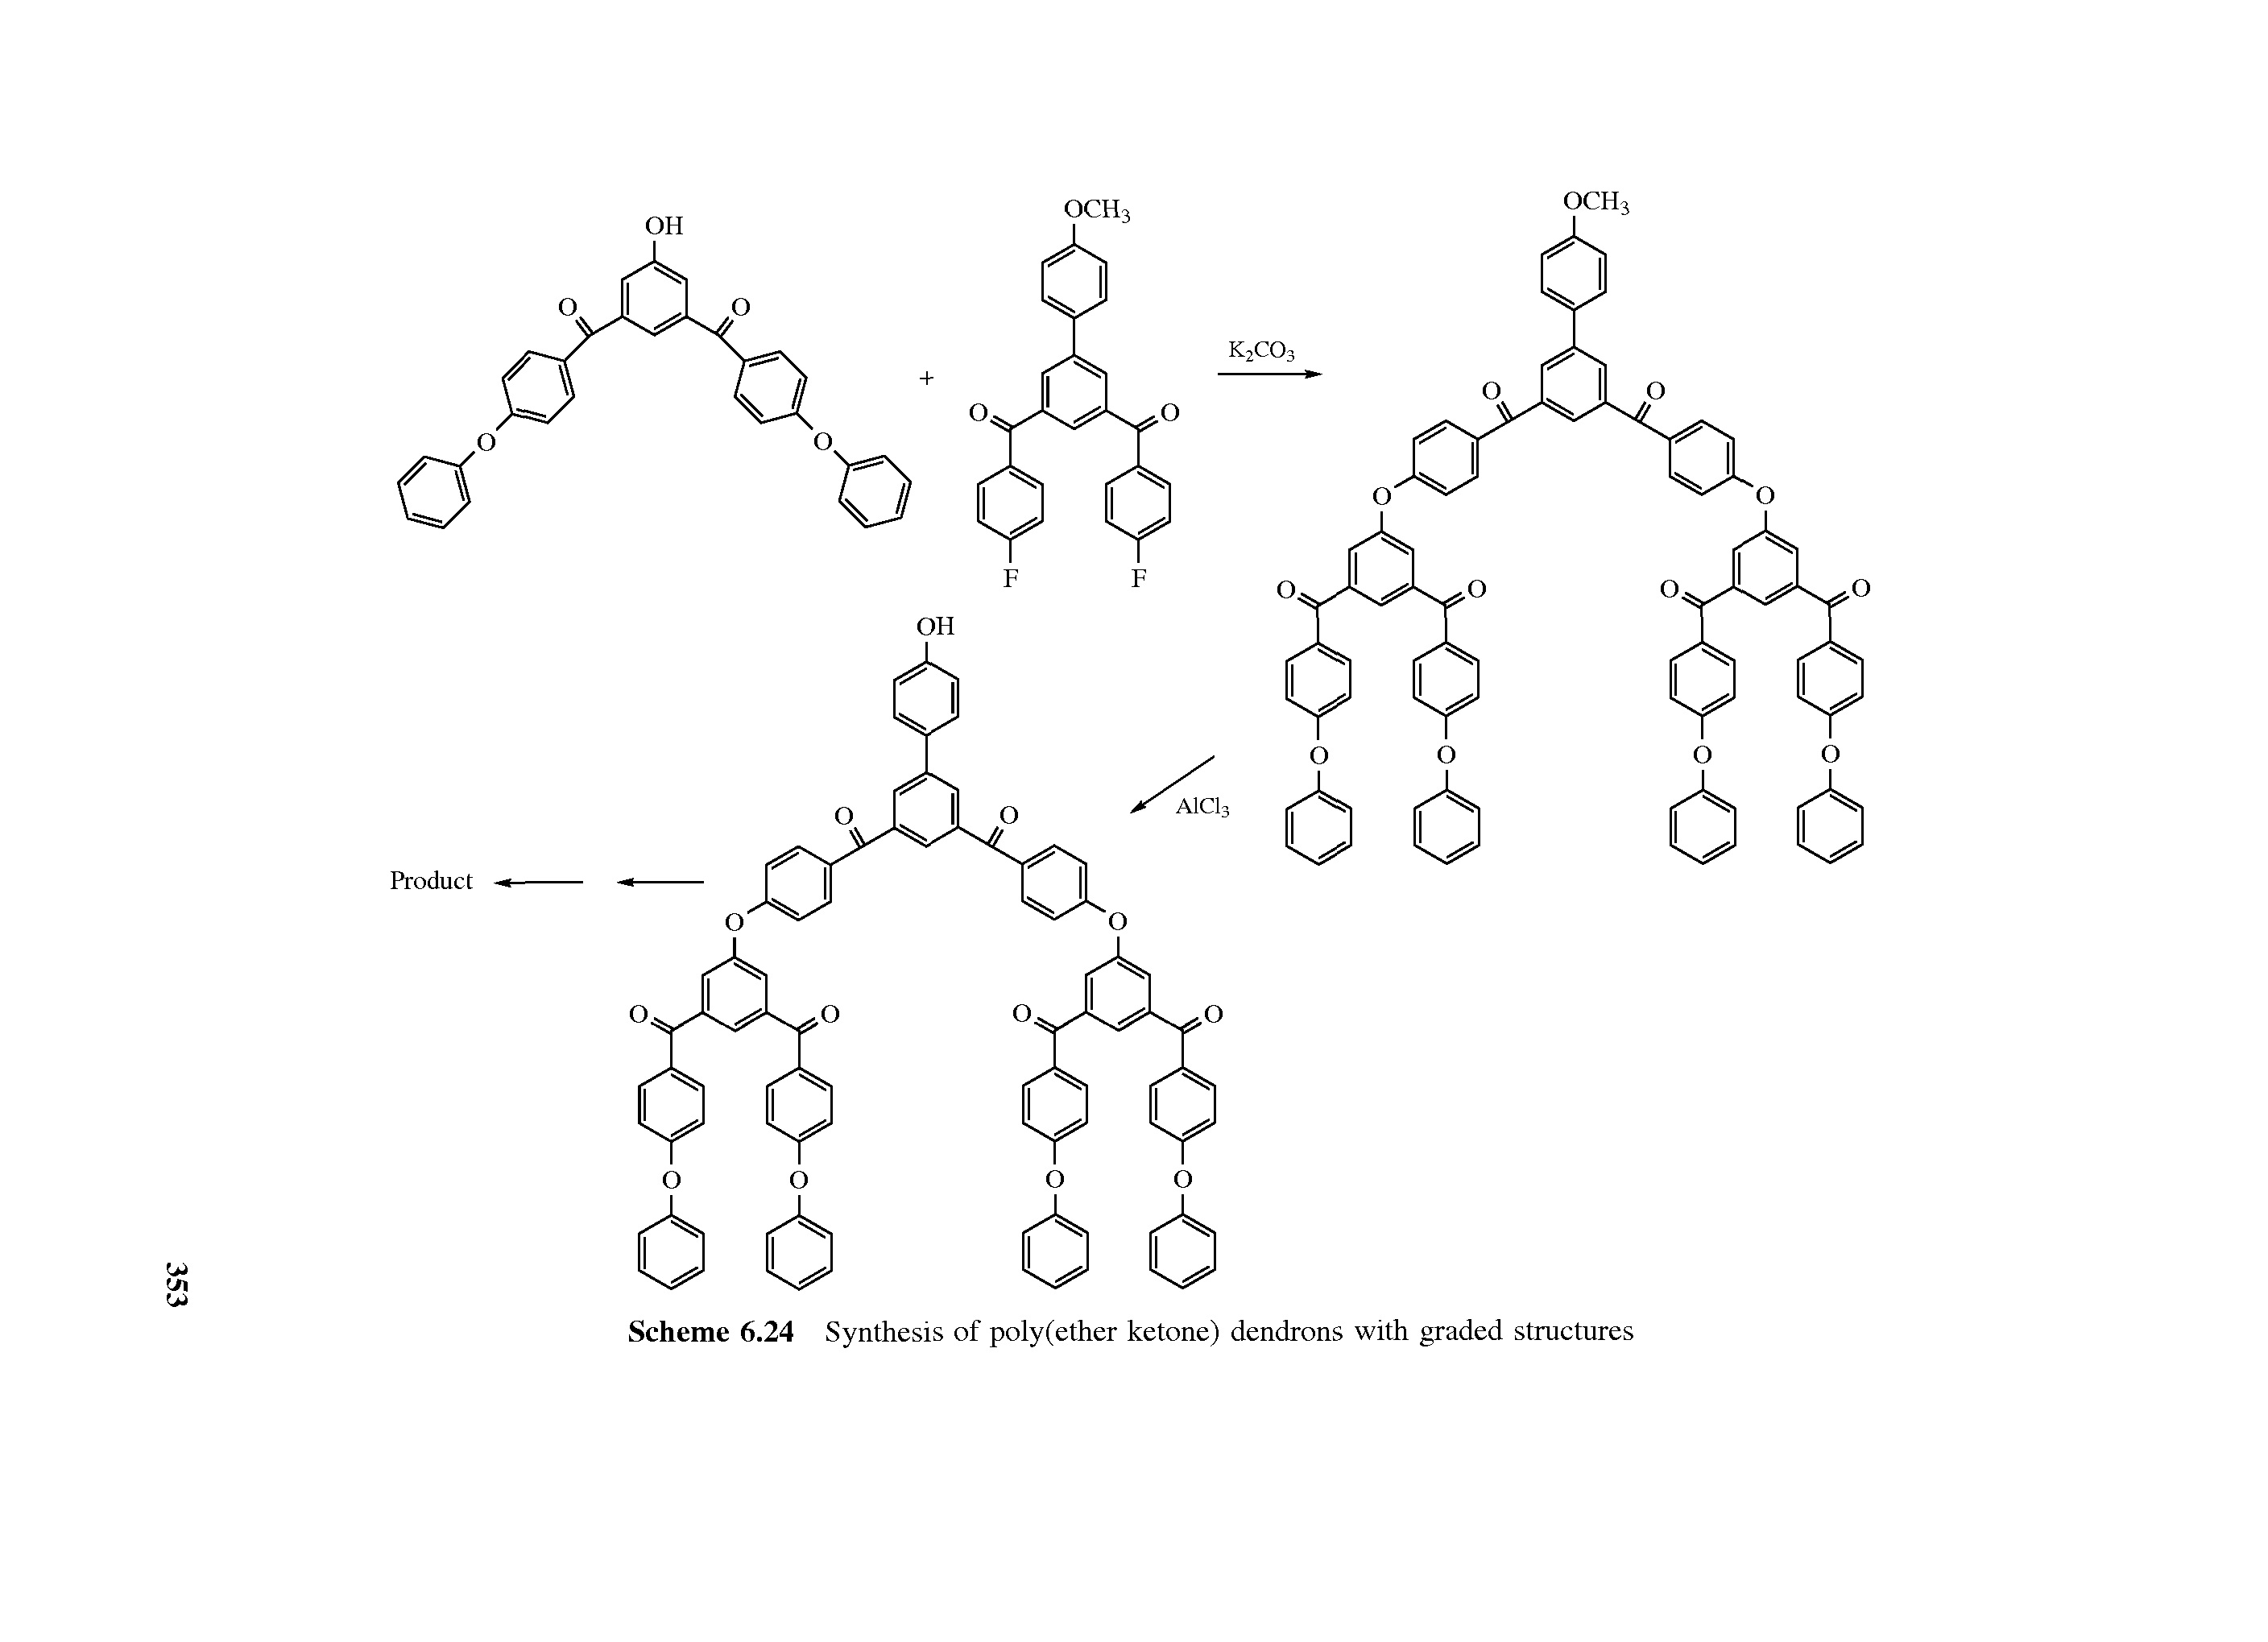 Scheme 6.24 Synthesis of poly(ether ketone) dendrons with graded structures...